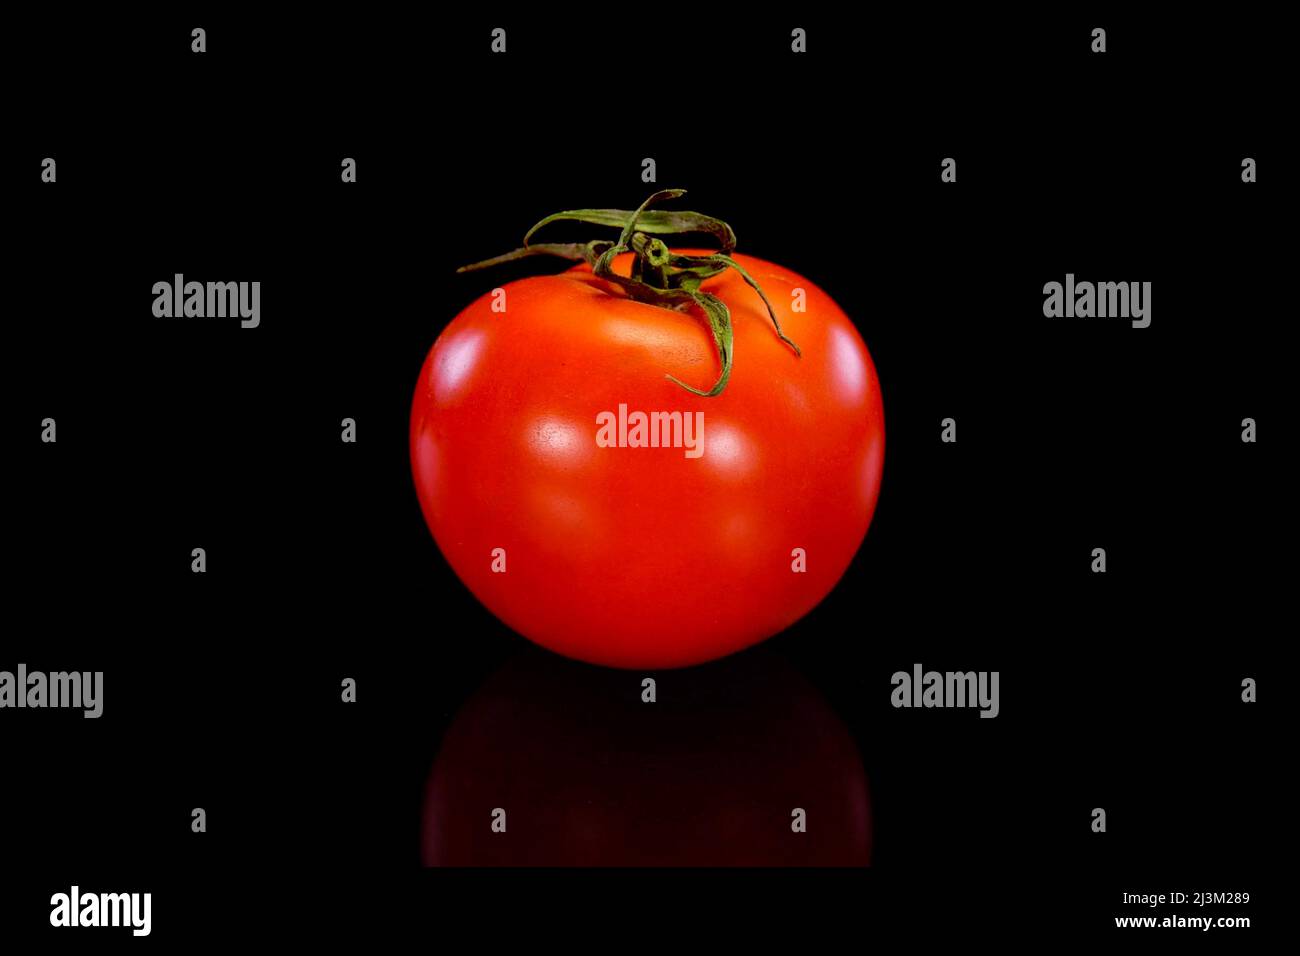 Red tomato on a black background. Fresh and firm tomato. Restaurant, groceries store or agriculture promo. Stock Photo